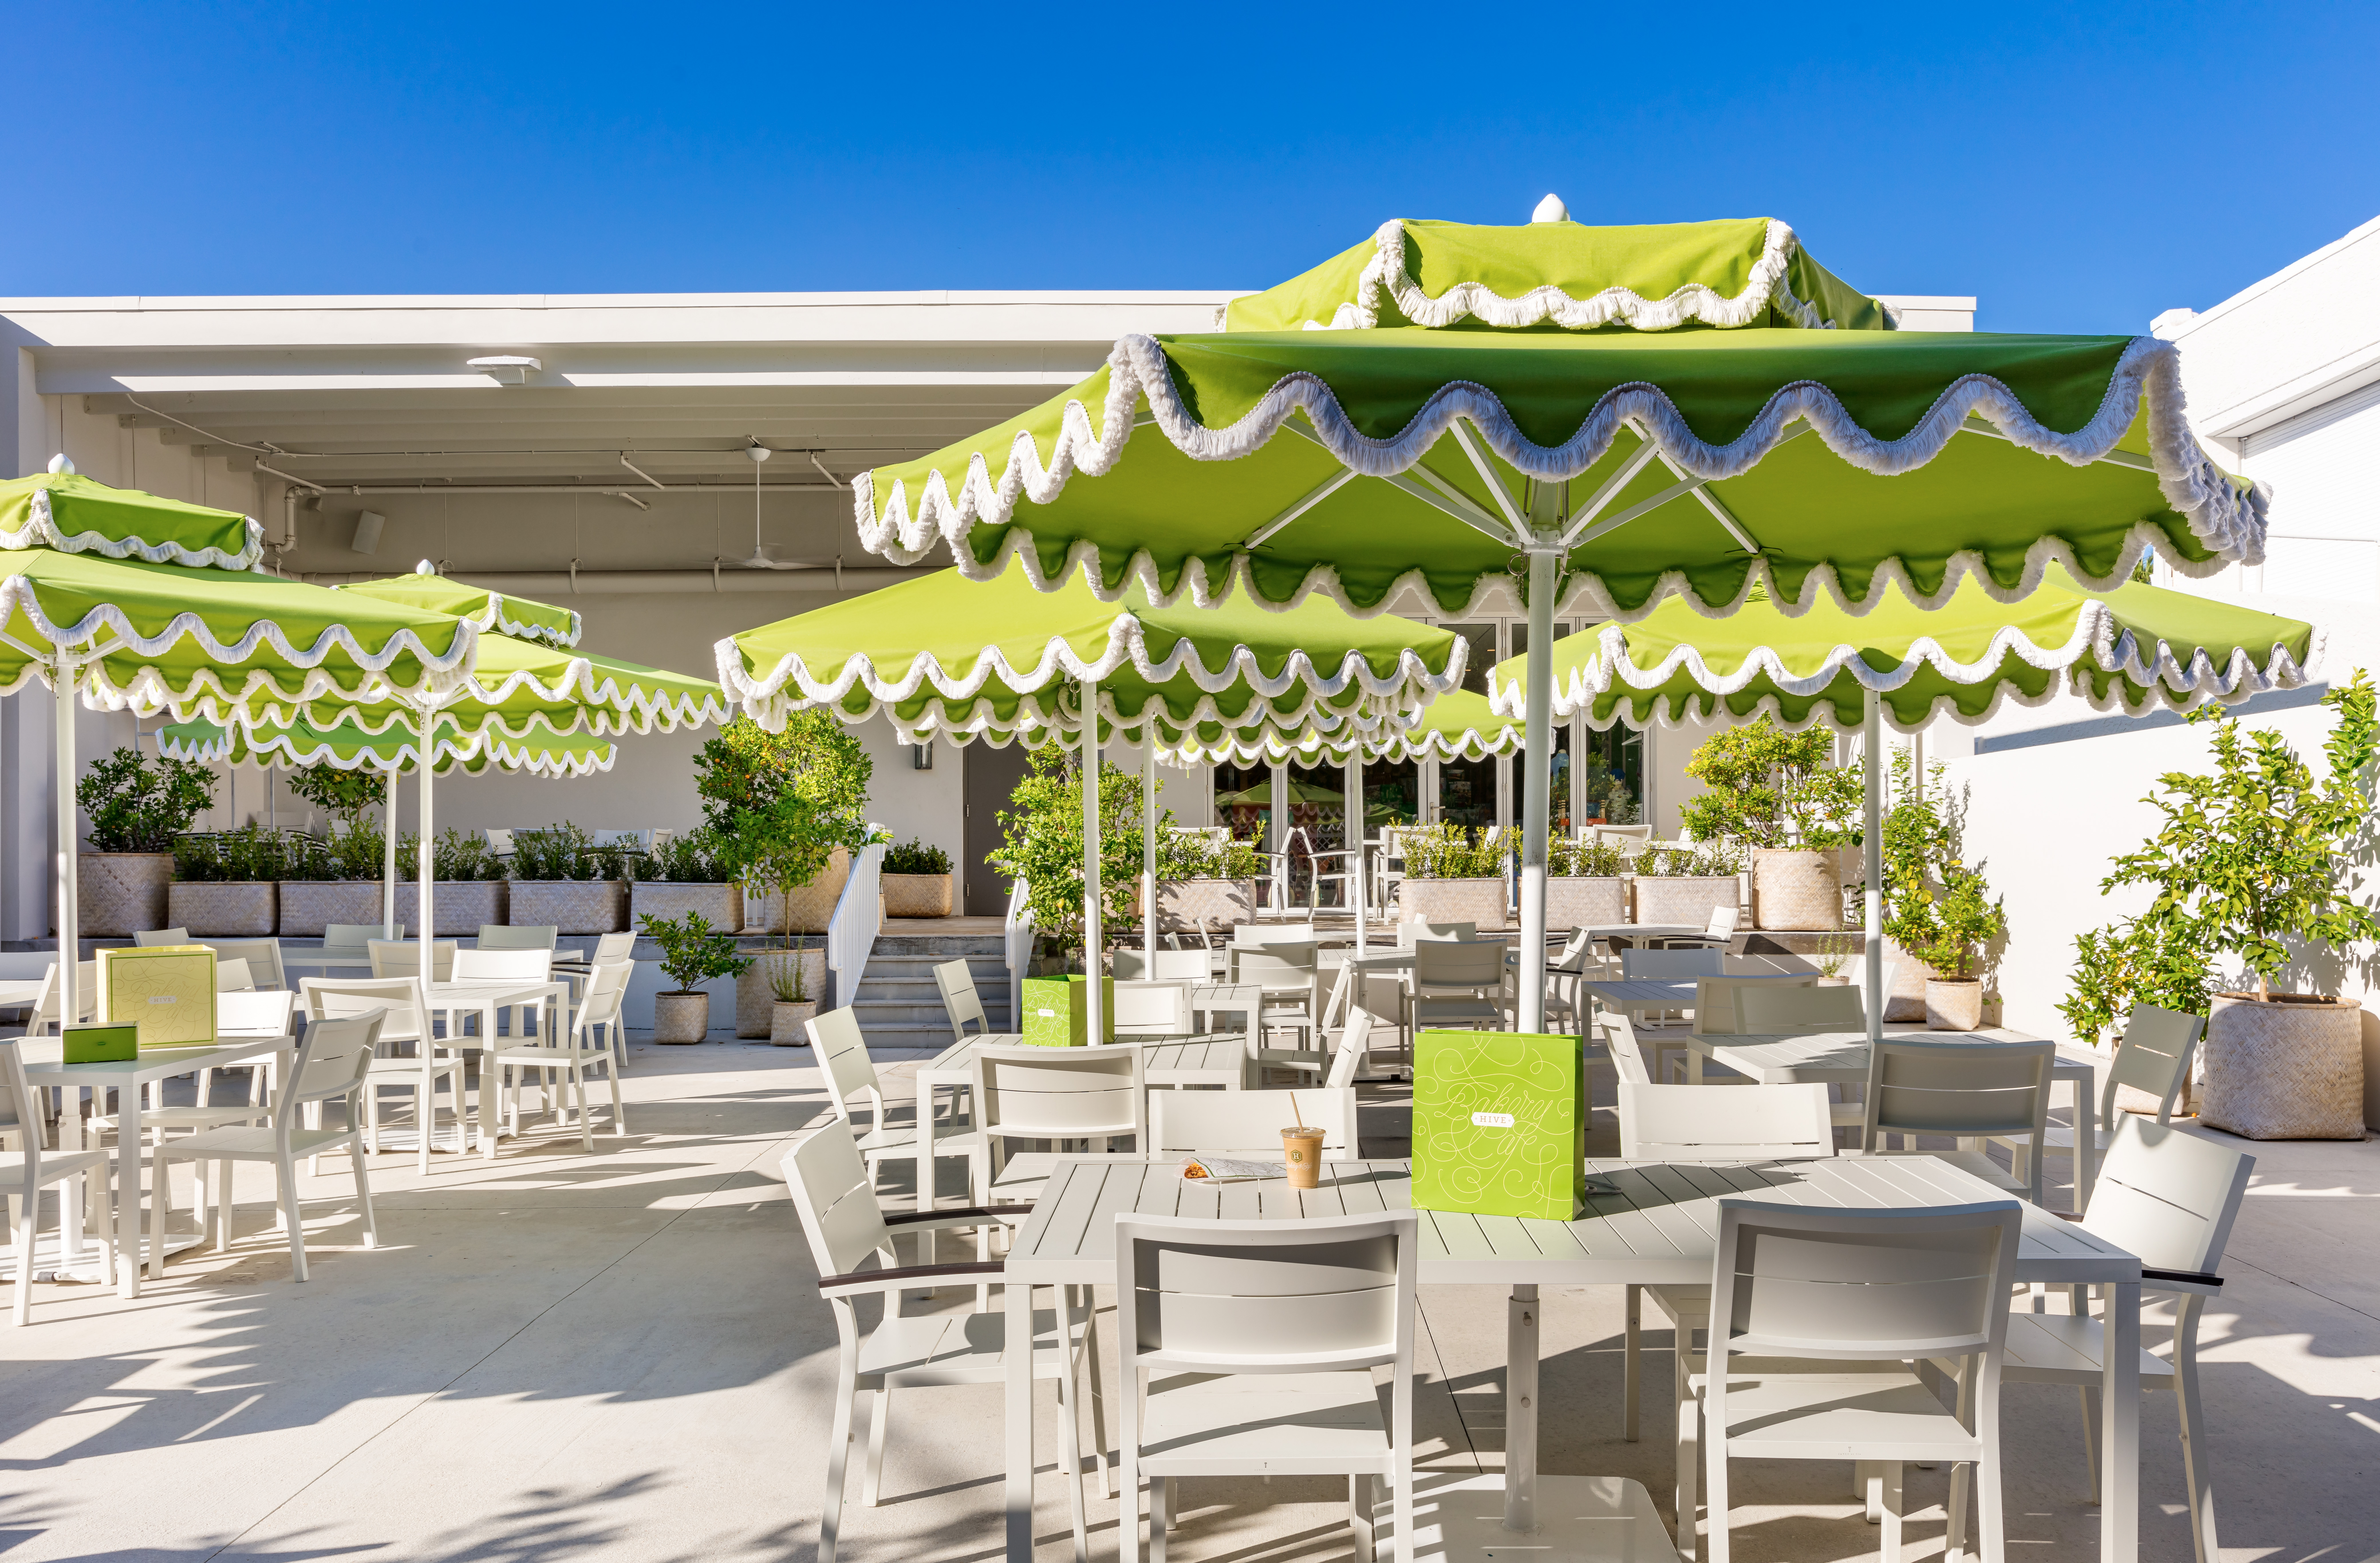 Photo of Hive's Outdoor Garden area with tables and green umbrellas